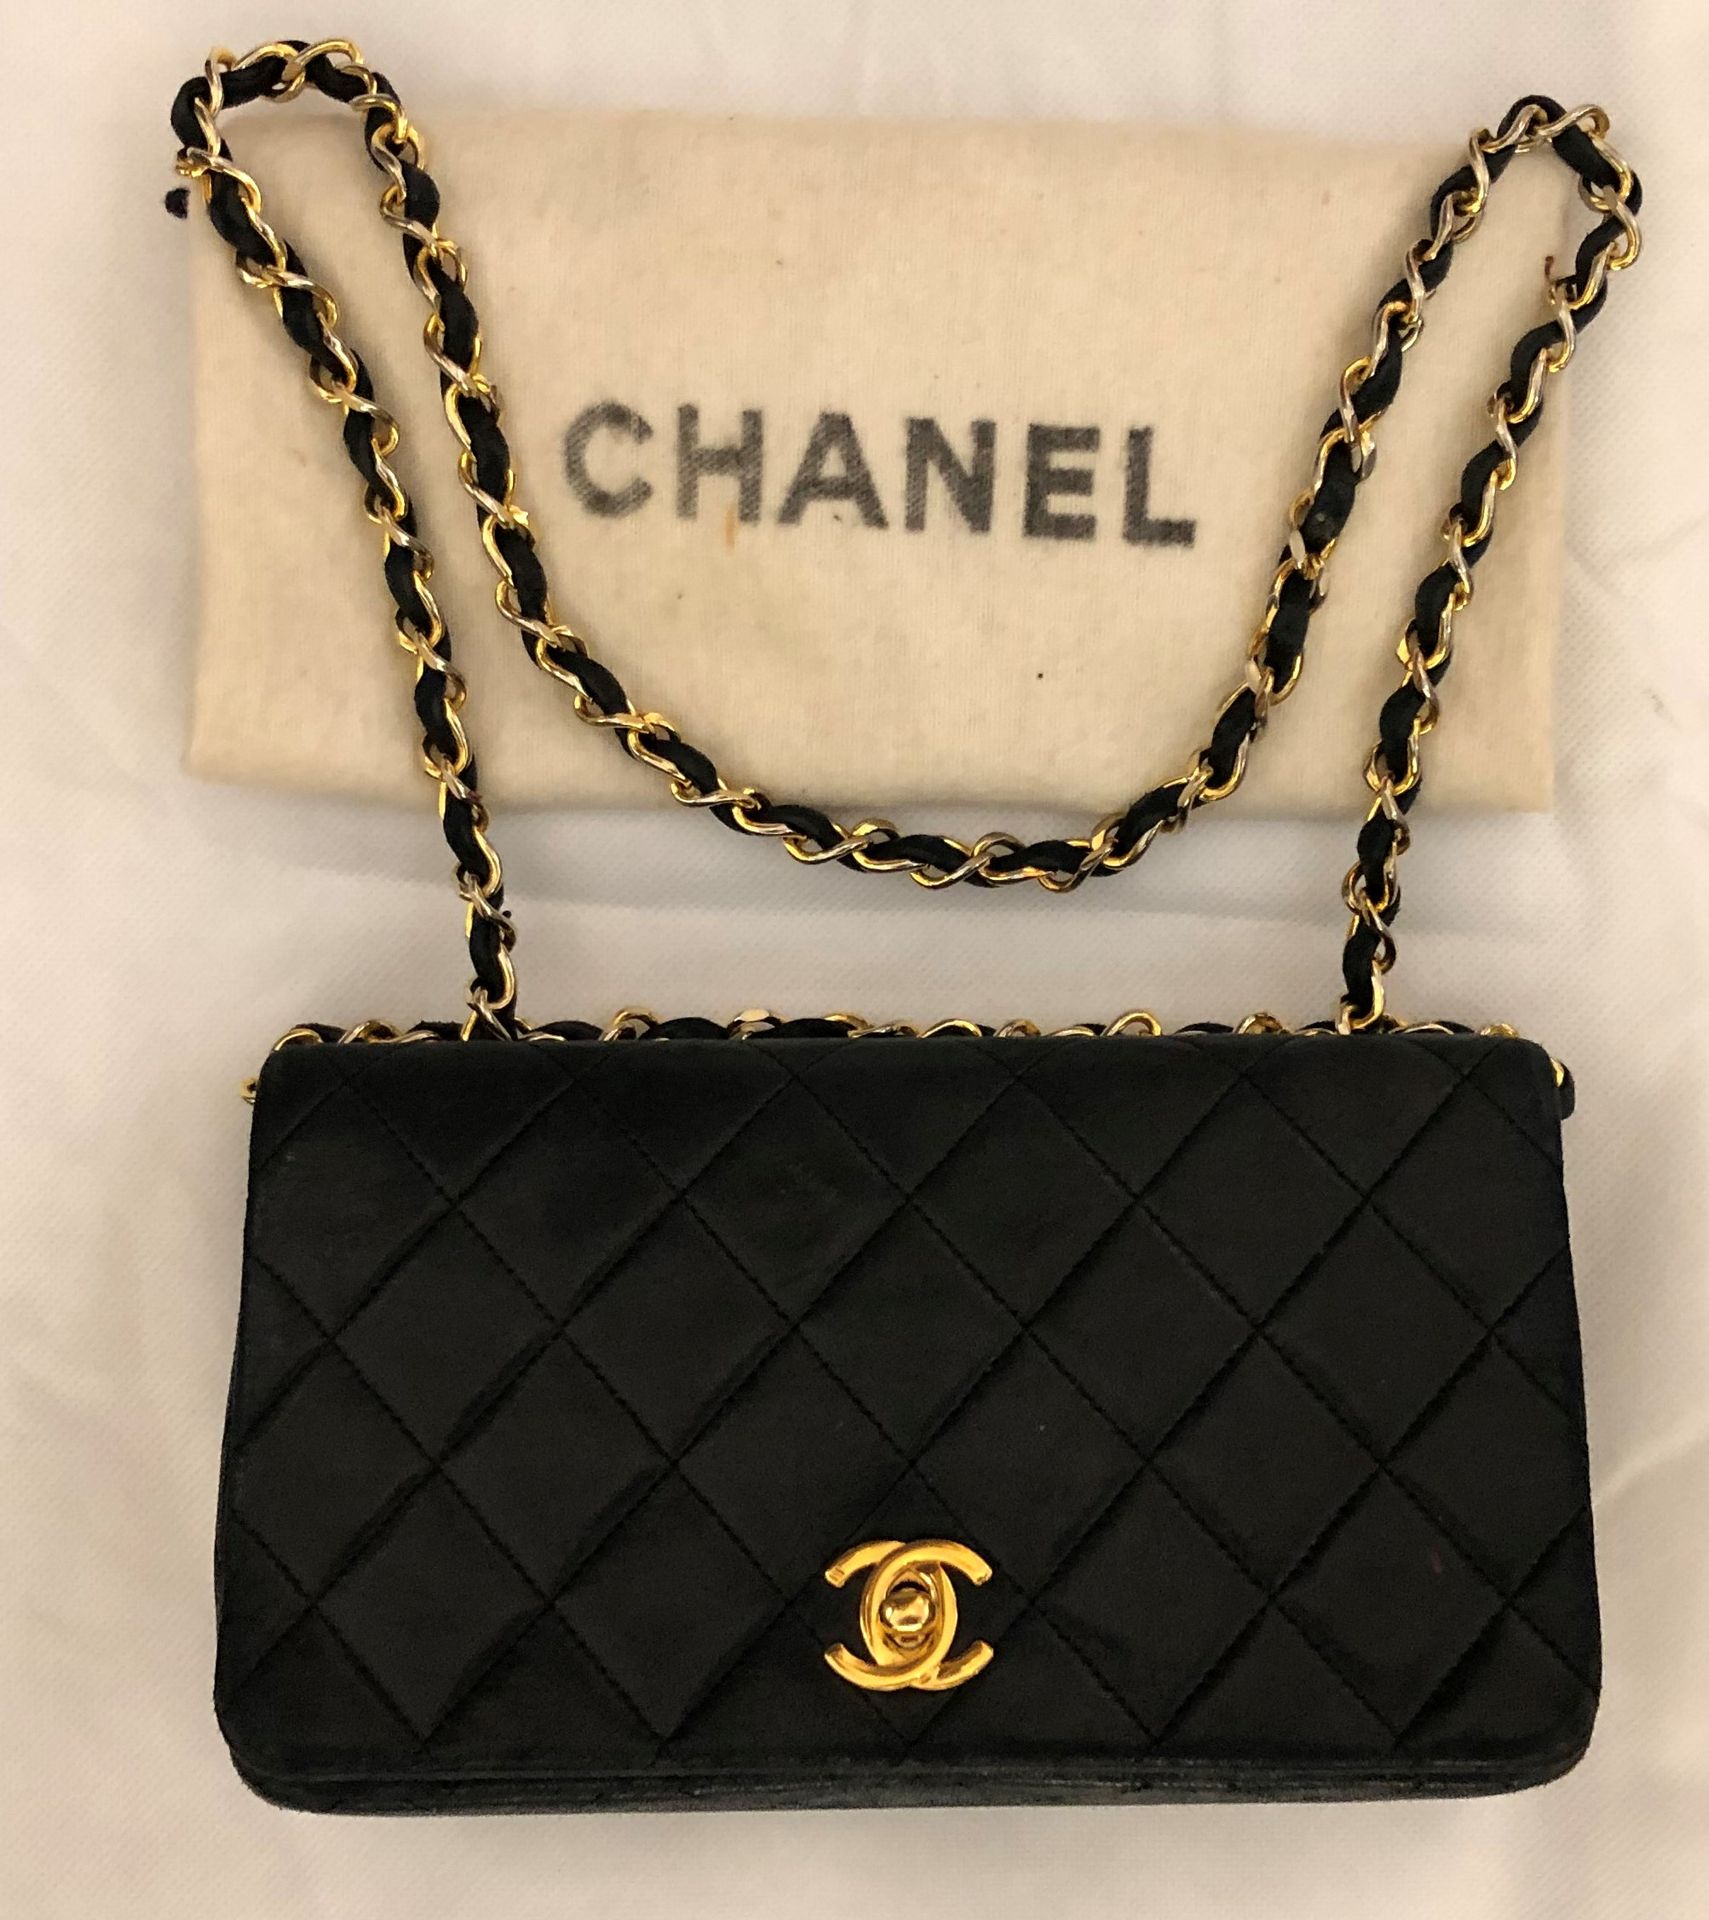 CHANEL. Mini handbag in navy blue quilted lambskin leath…